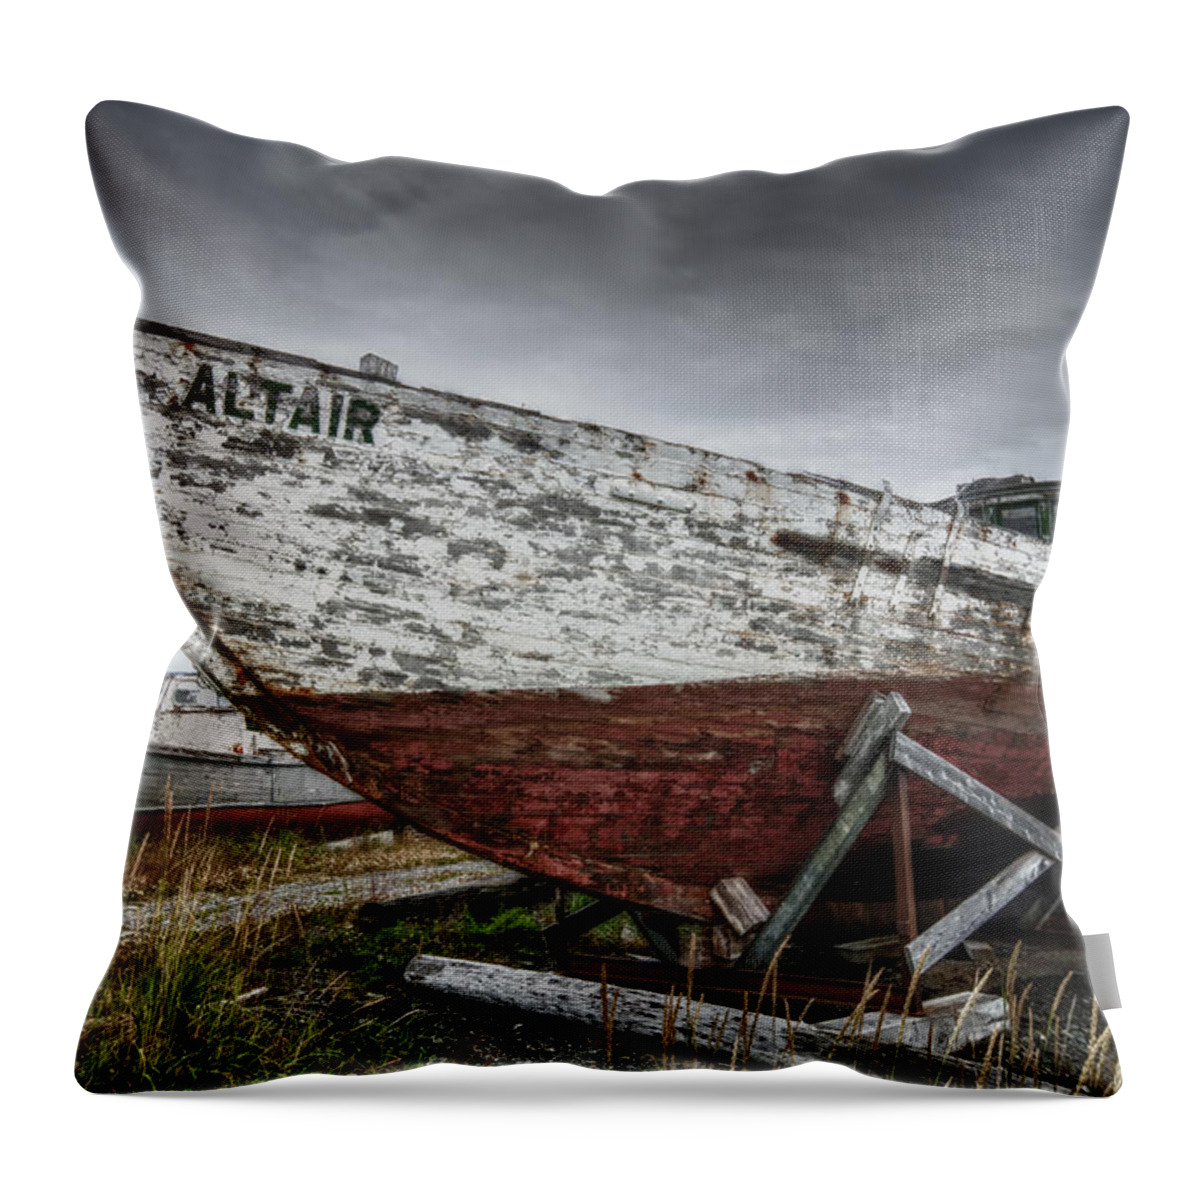 Boats Throw Pillow featuring the photograph The Lost Fleet Altair 2 by Ghostwinds Photography